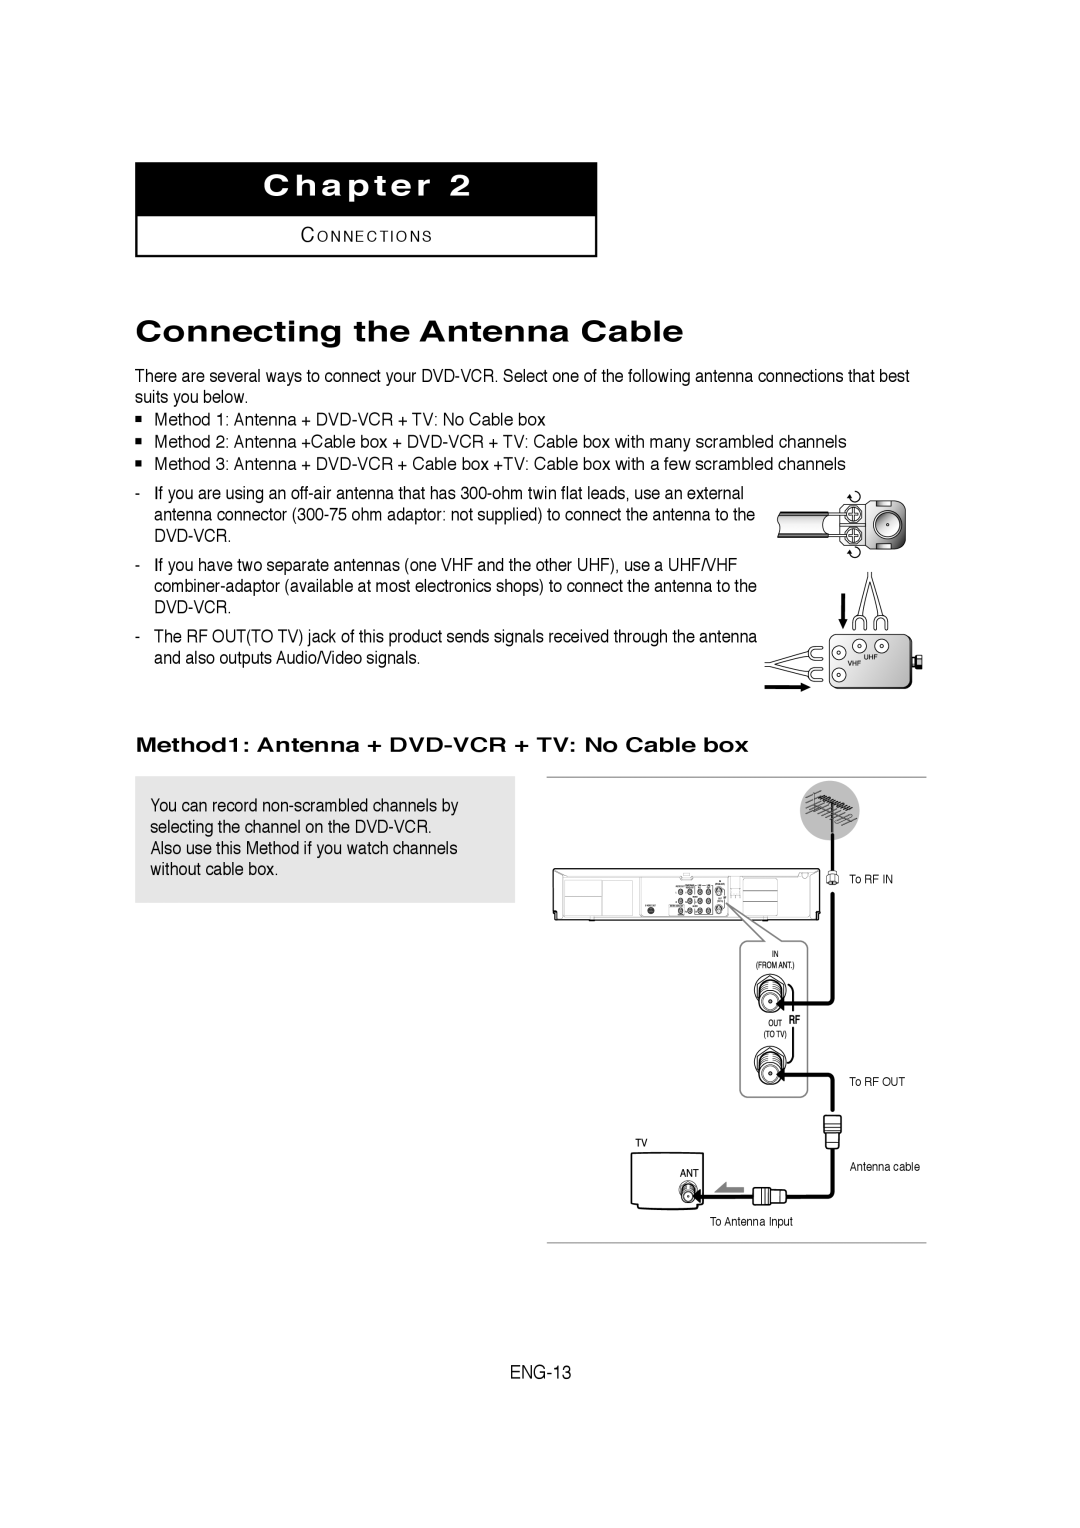 Samsung AK68-01304A, V6700-XAC Connecting the Antenna Cable, Method1 Antenna + DVD-VCR + TV No Cable box, Chapter 